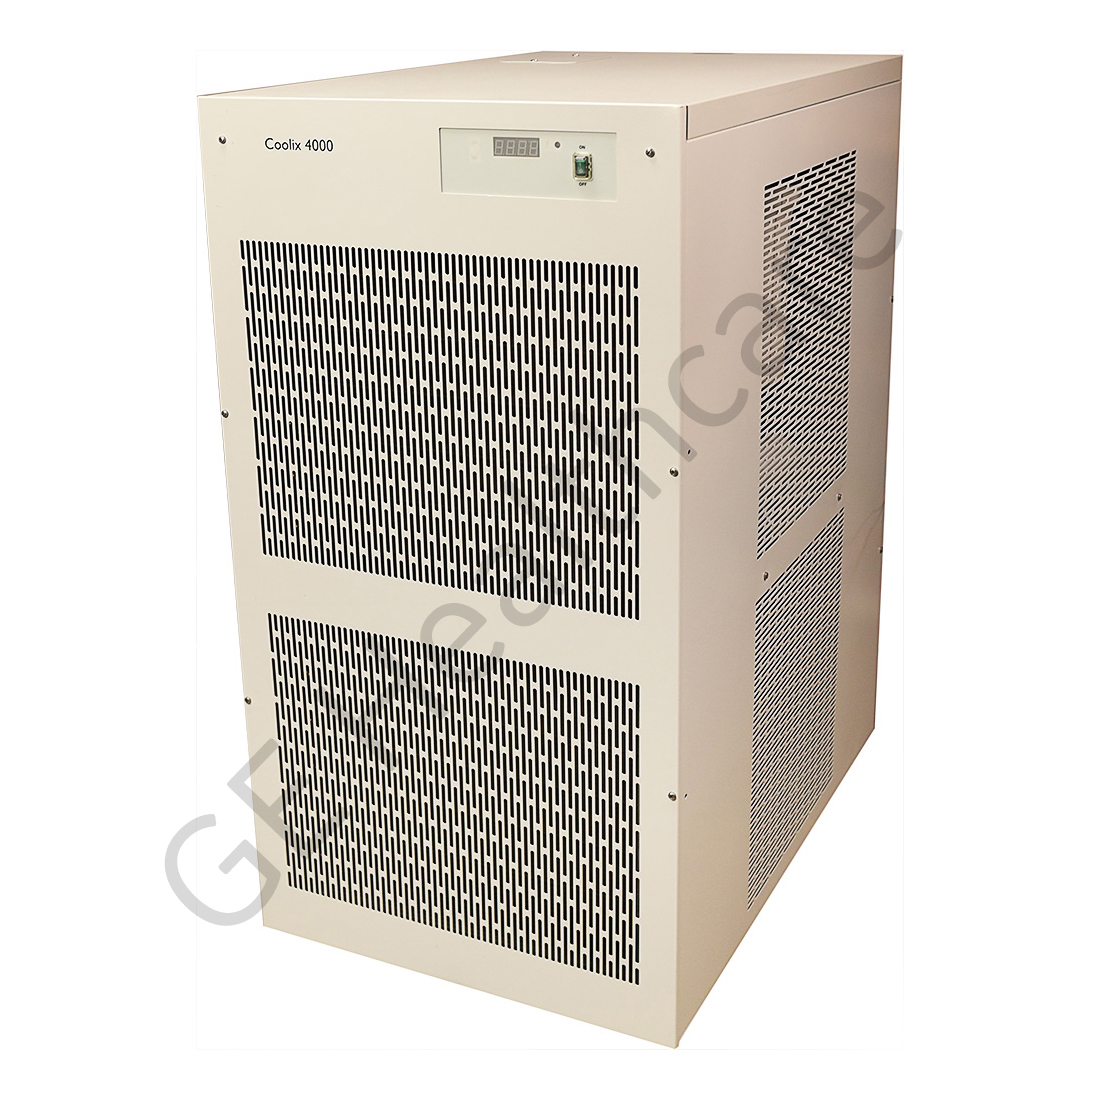 COOLIX 4000 Chiller for Performix 160 Vascular X-Ray Tube